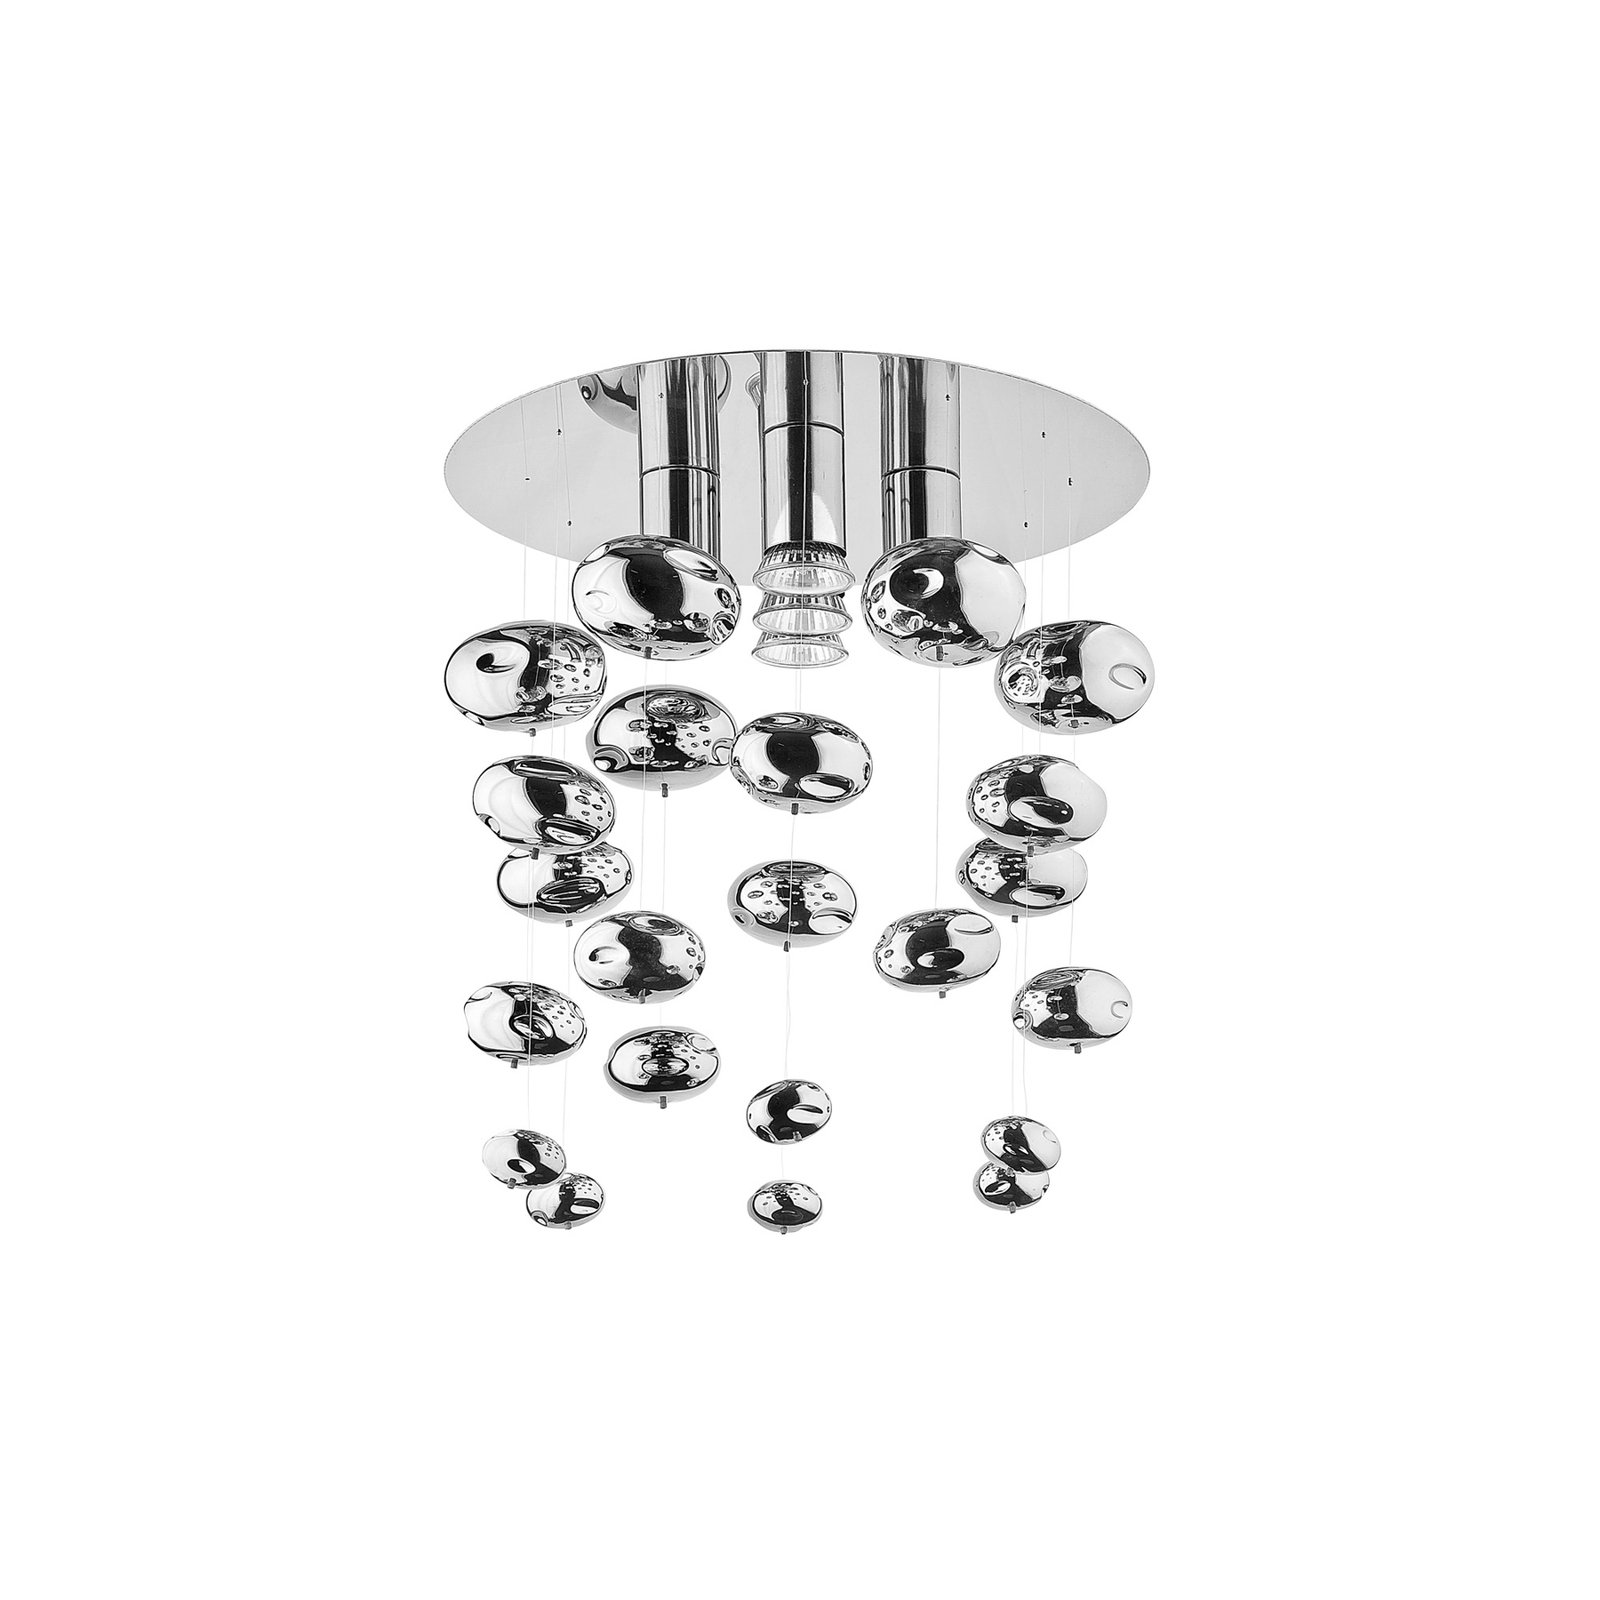 Salva E ceiling light with glass elements